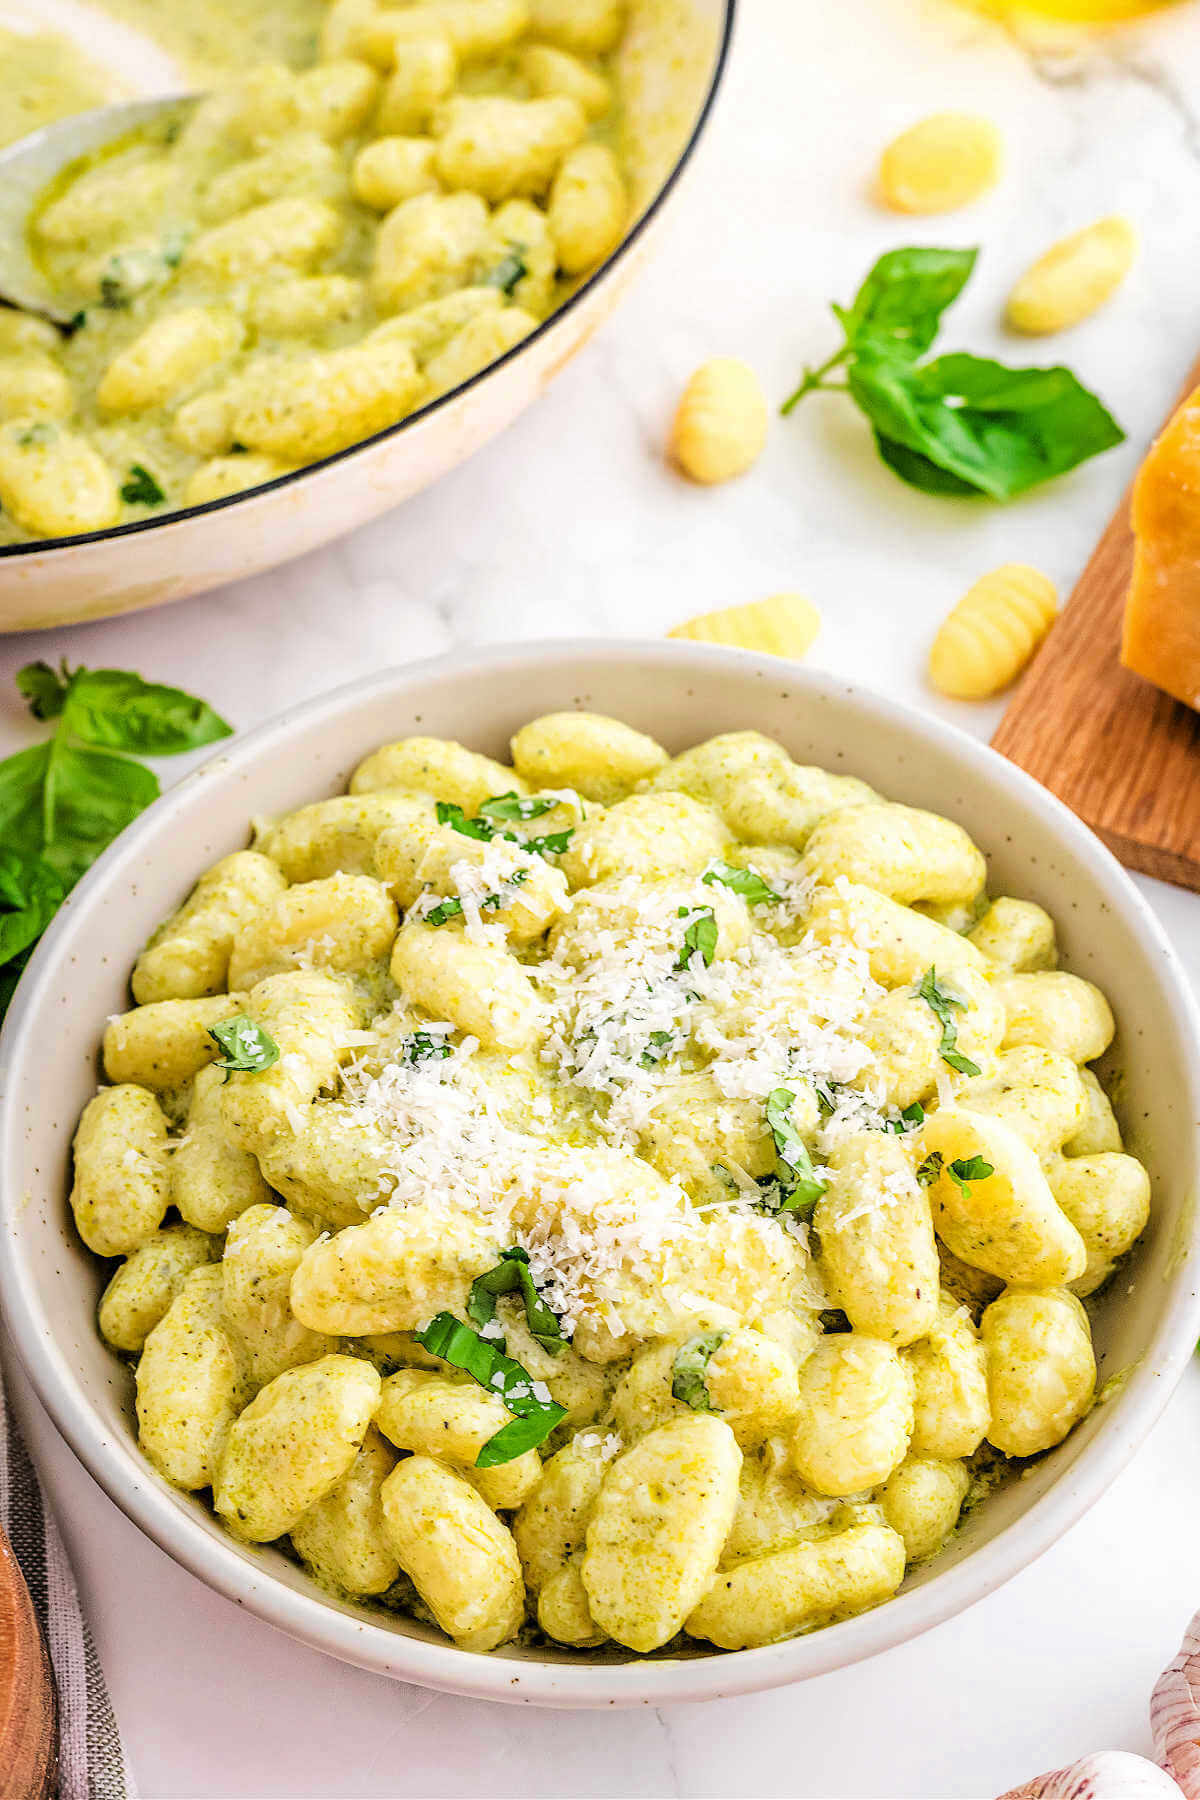 a serving of gnocchi with pesto sauce in a serving bowl on a table.